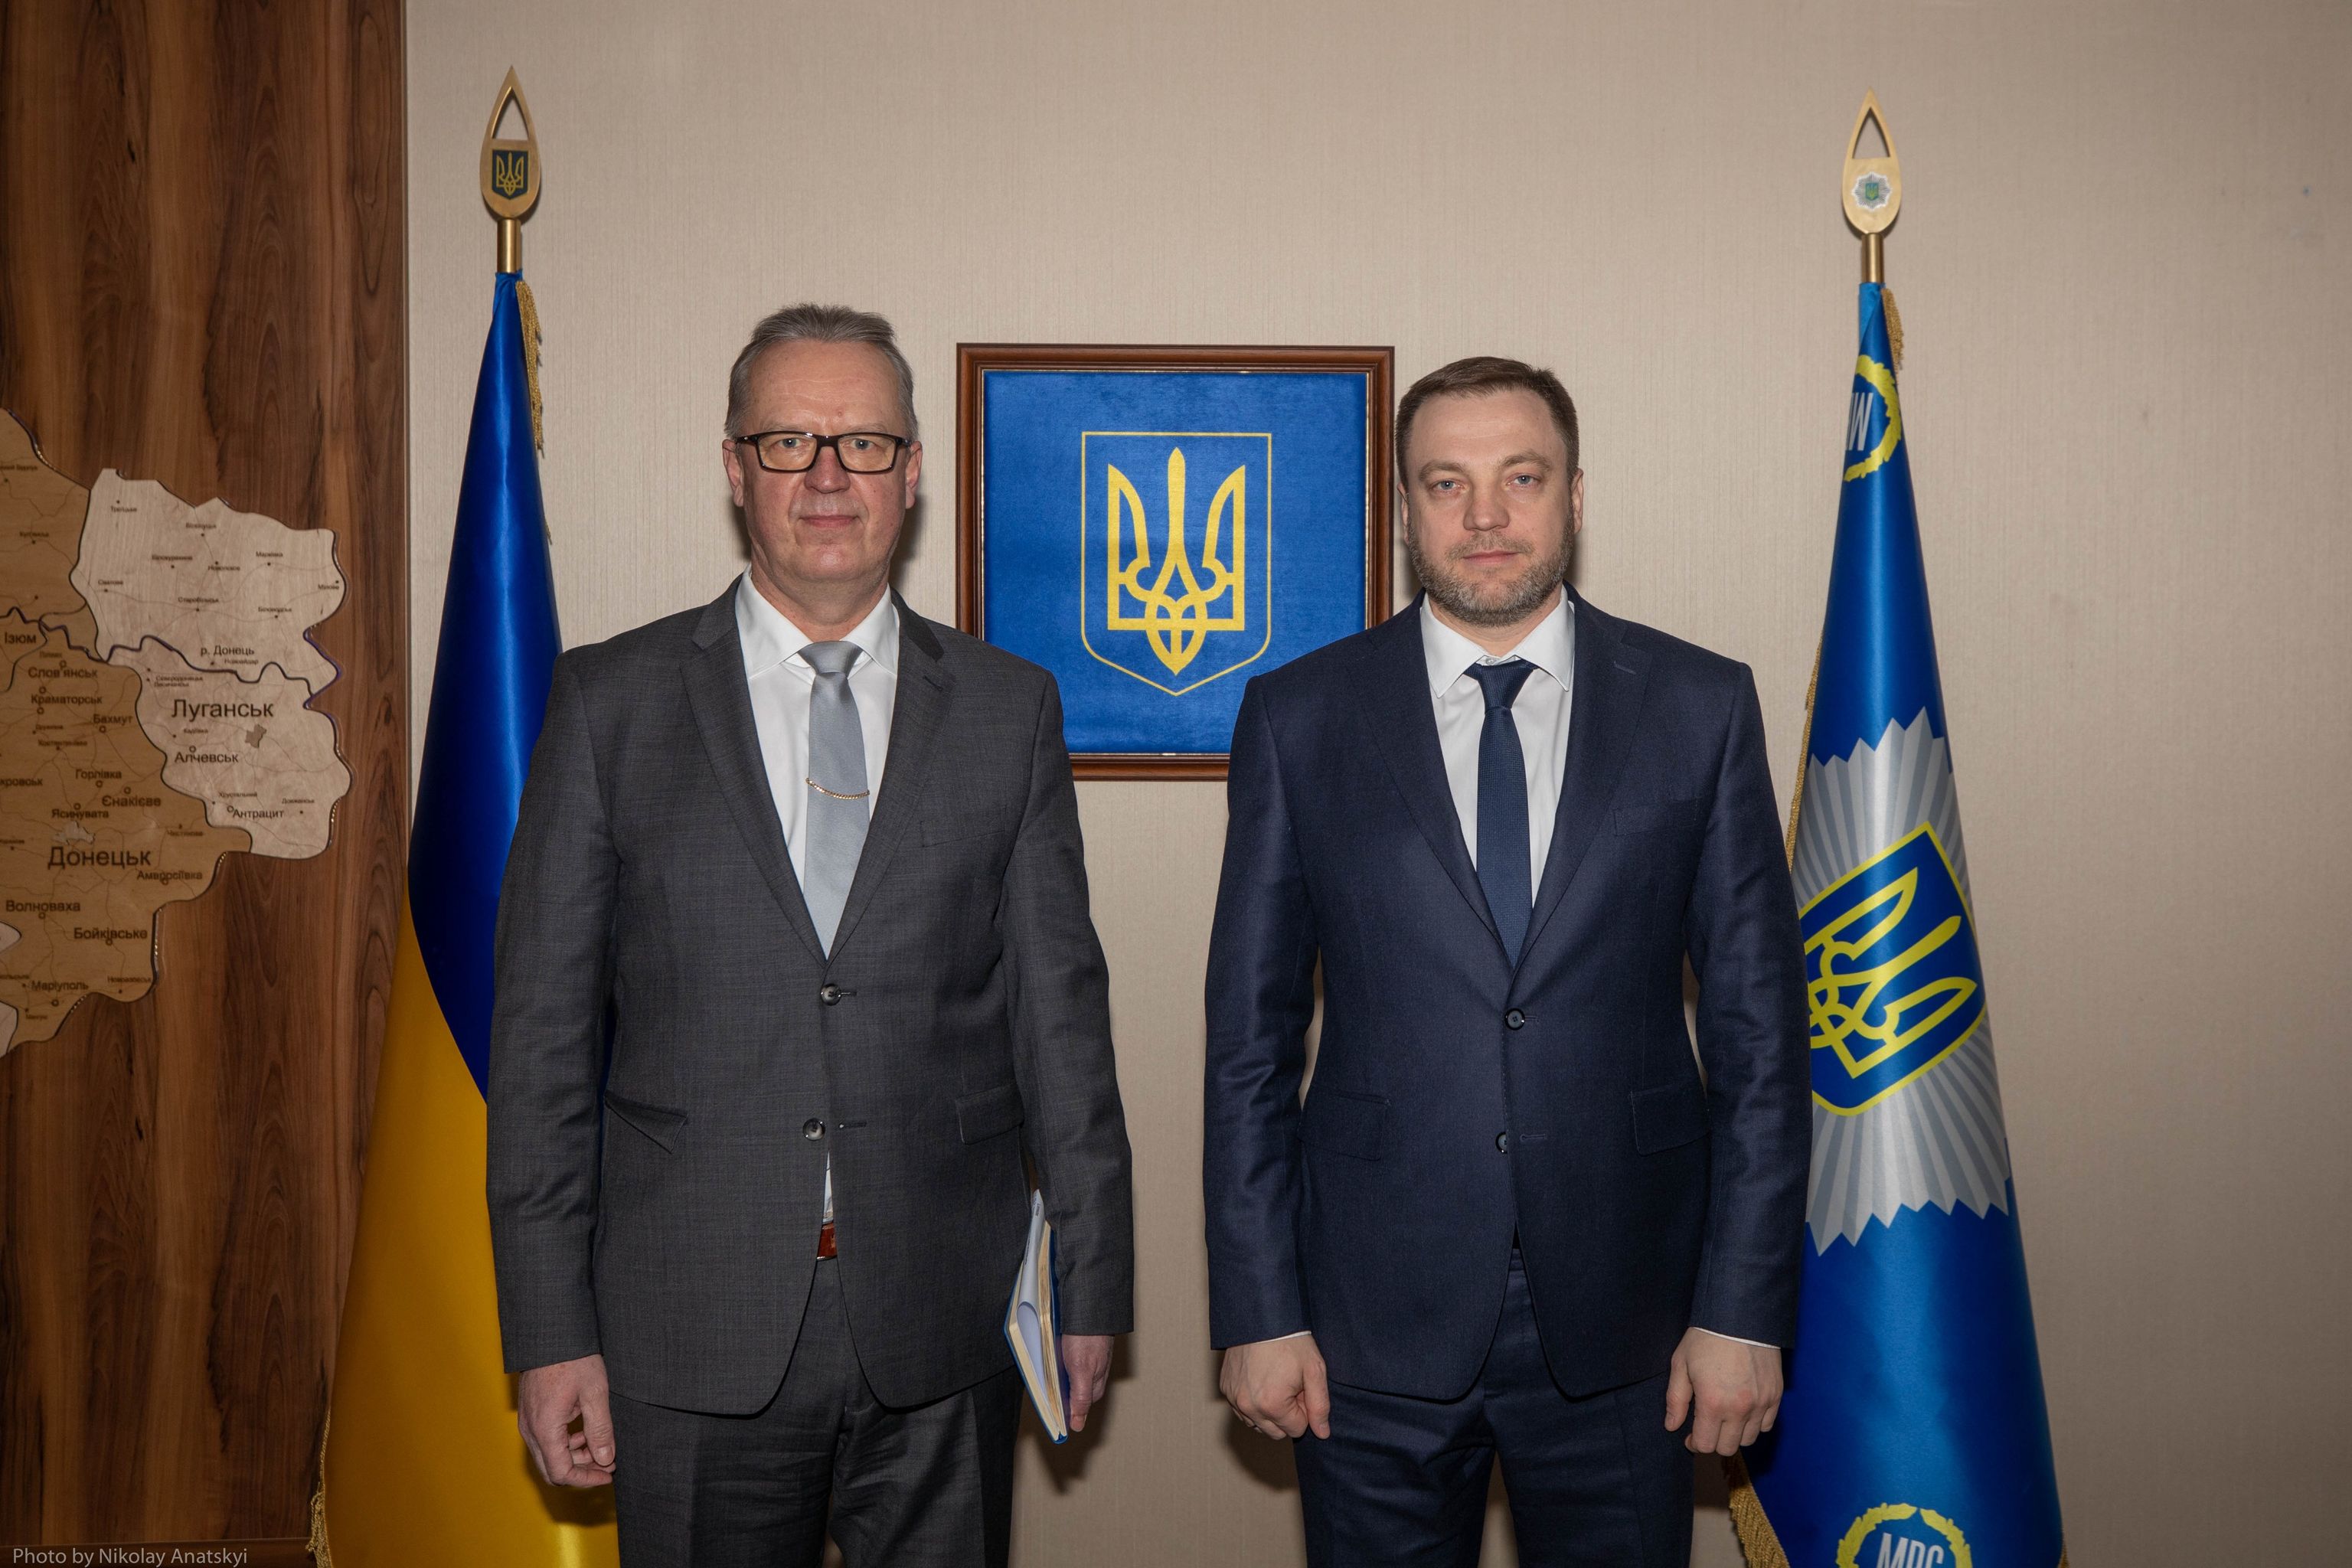 Denis Monastyrskiy held a meeting with the head of the European Union Advisory Mission